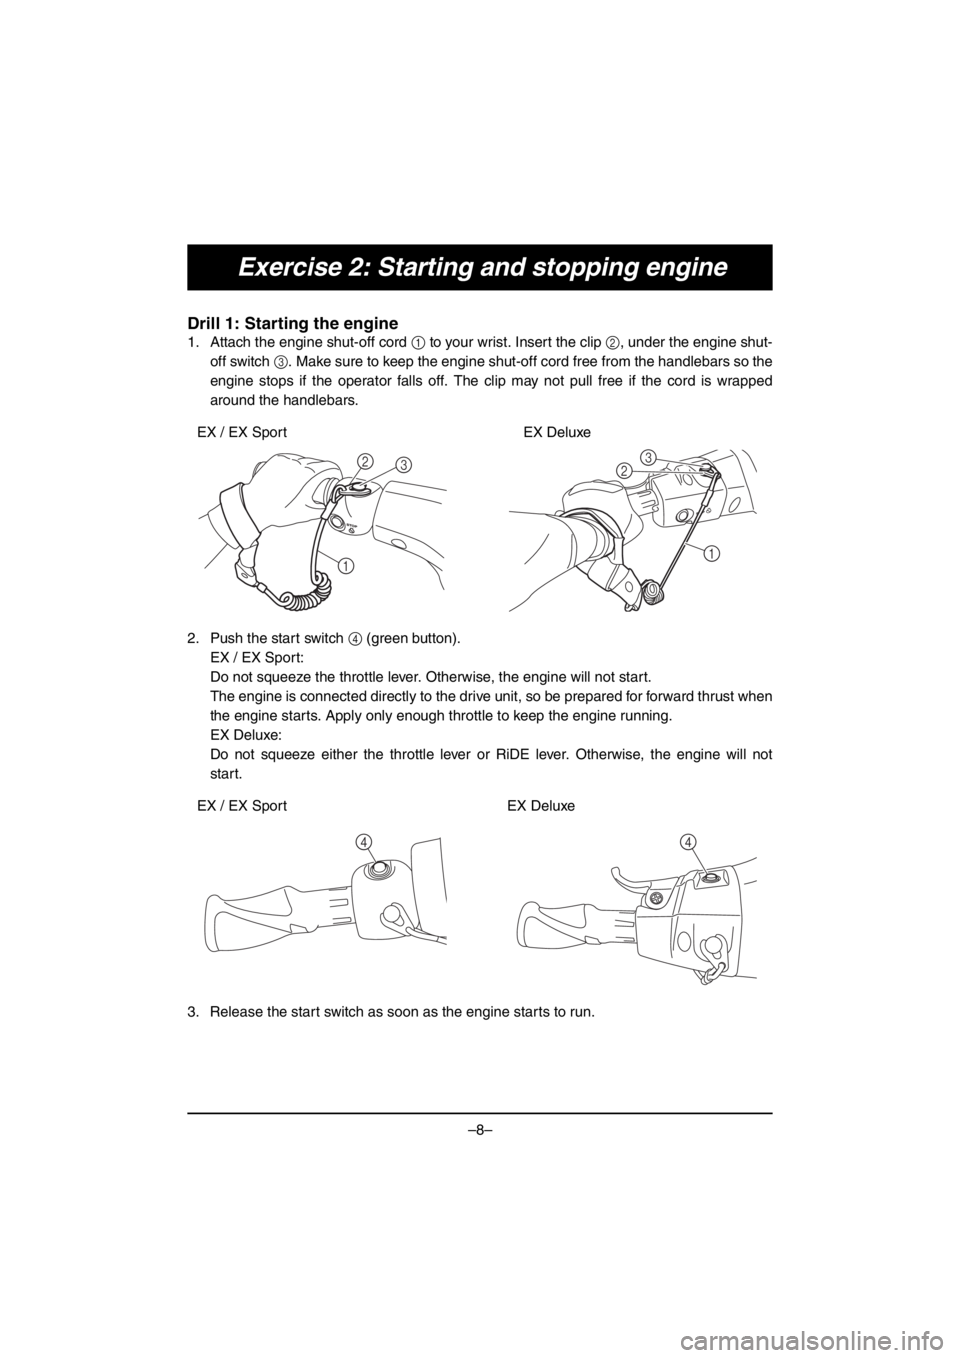 YAMAHA EX SPORT 2017  ΟΔΗΓΌΣ ΧΡΉΣΗΣ (in Greek) –8–
Exercise 2: Starting and stopping engine
Drill 1: Starting the engine
1. Attach the engine shut-off cord 1 to your wrist. Insert the clip 2, under the engine shut-
off switch 3. Make sure to k